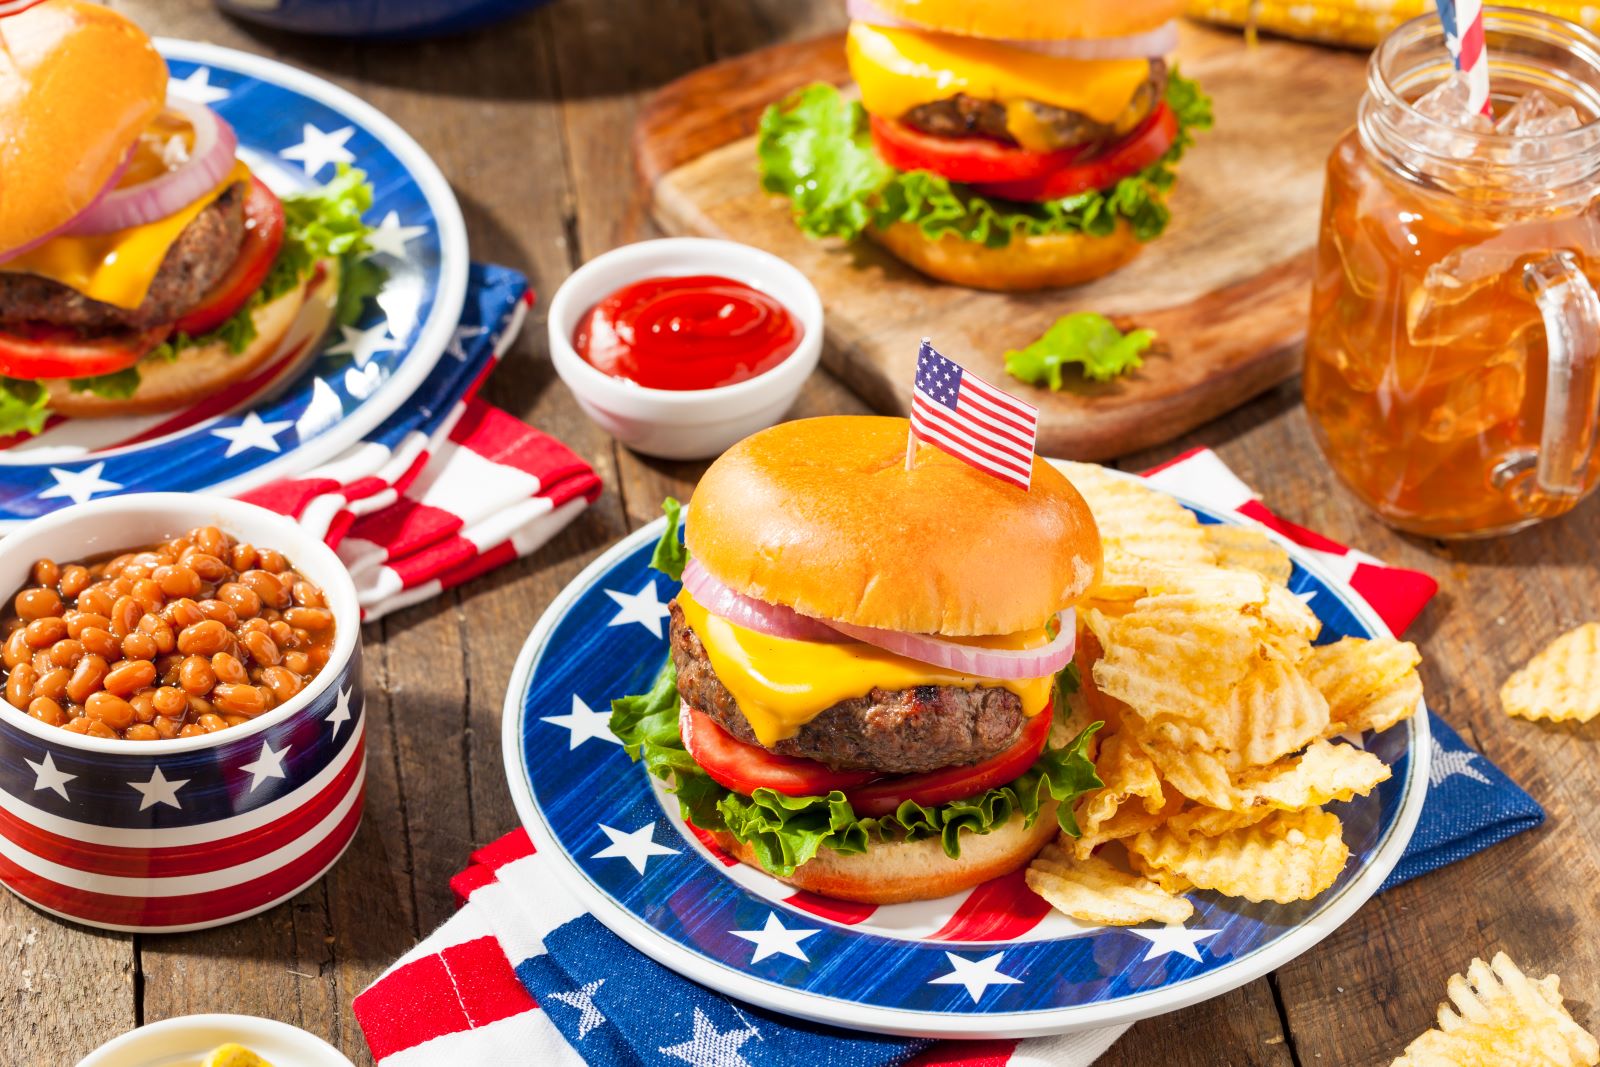 4 Practical Tips for a Guilt-Free Fourth of July